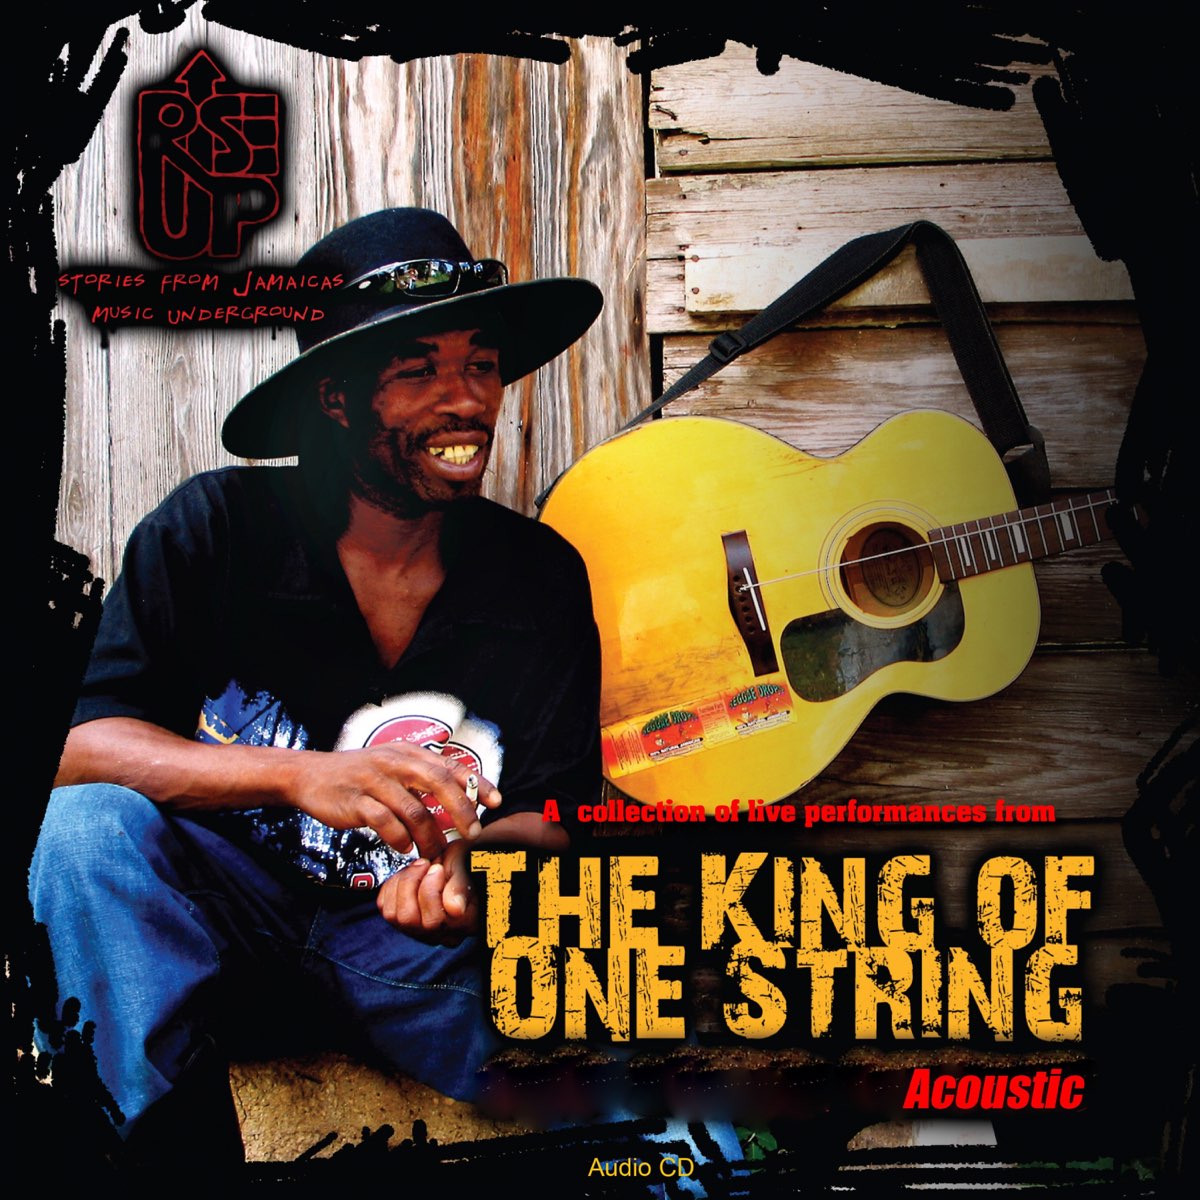 The King of One String (Acoustic) - Album by Brushy One String - Apple Music